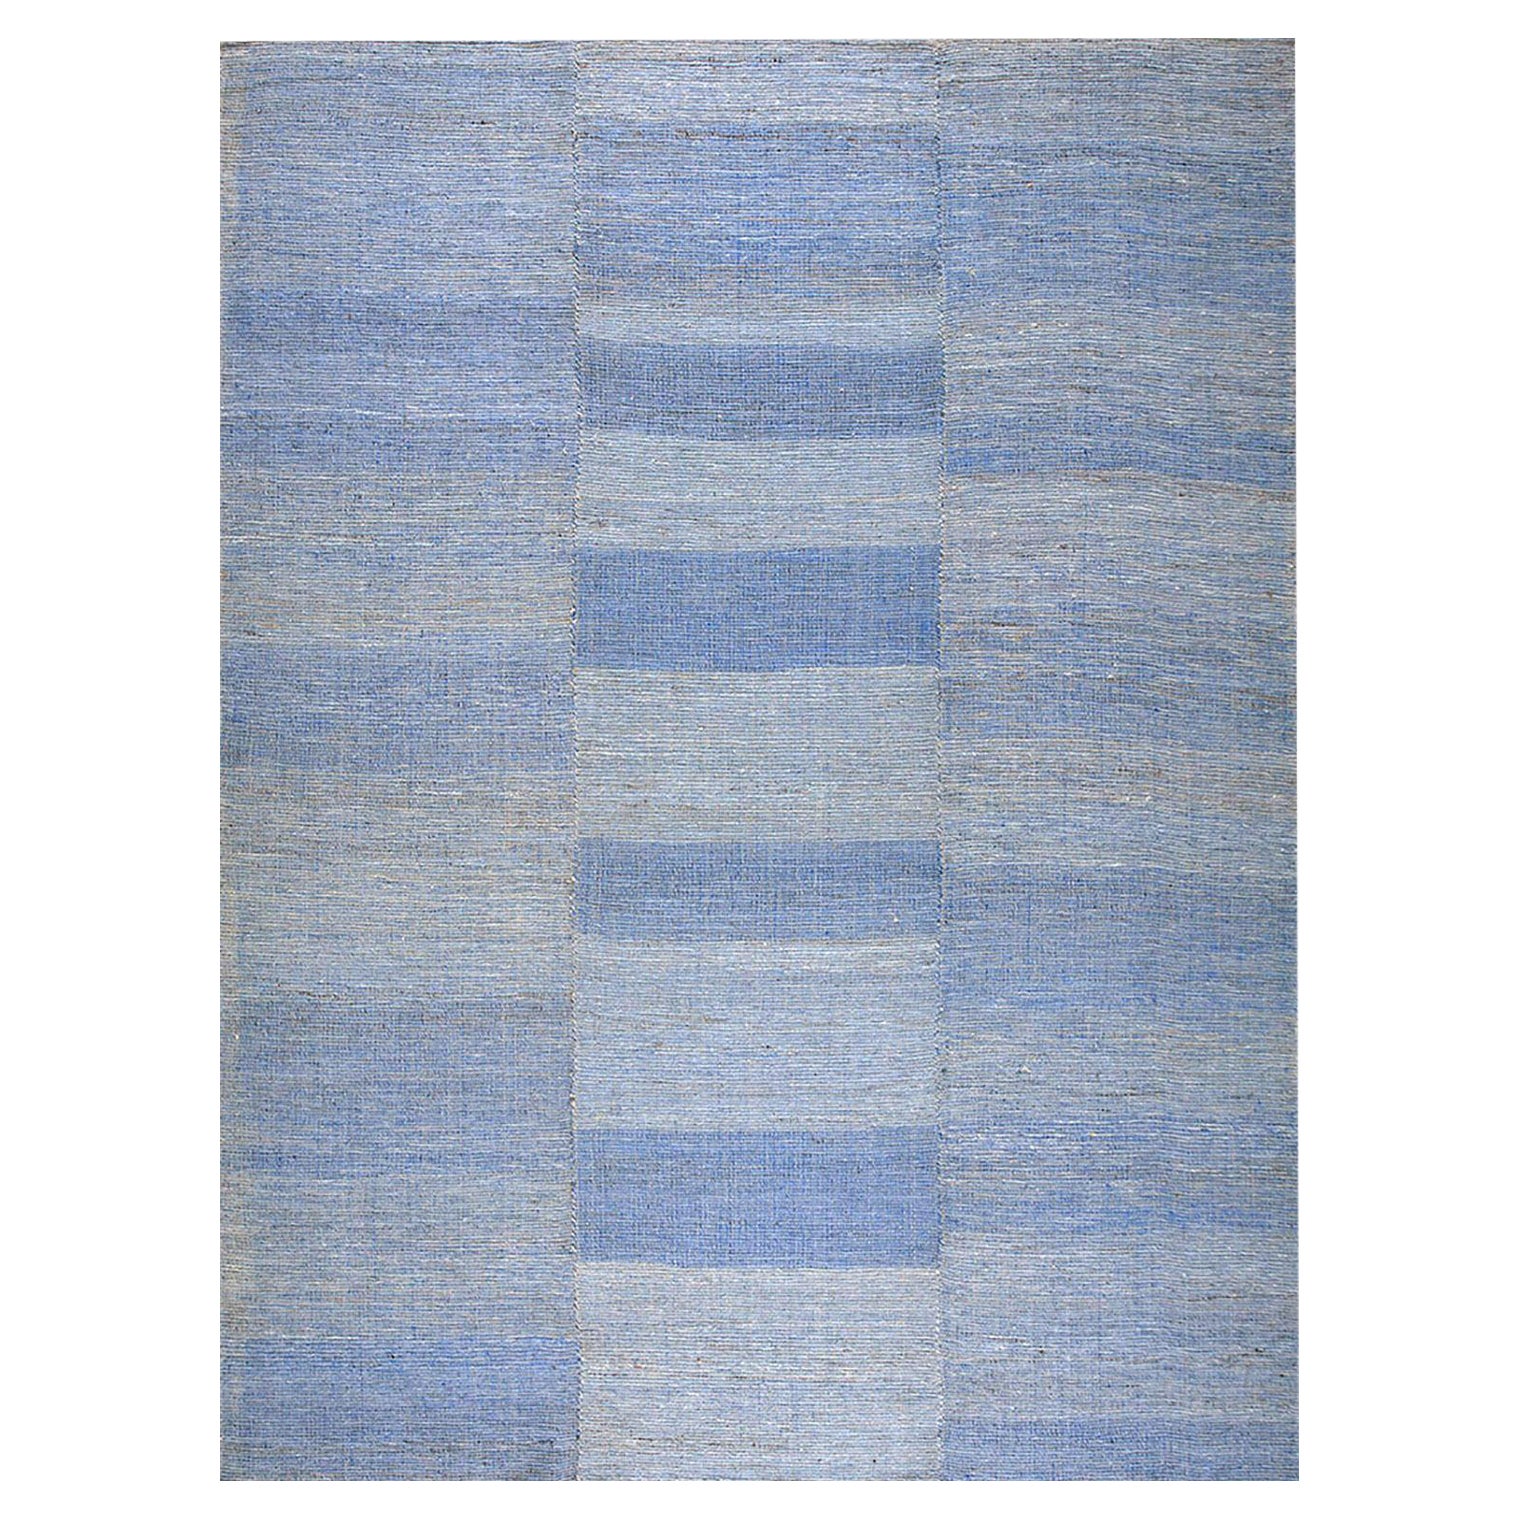 Contemporary Handwoven Wool Shaker Style Flat Weave Carpet 9' 2" X 11' 9"